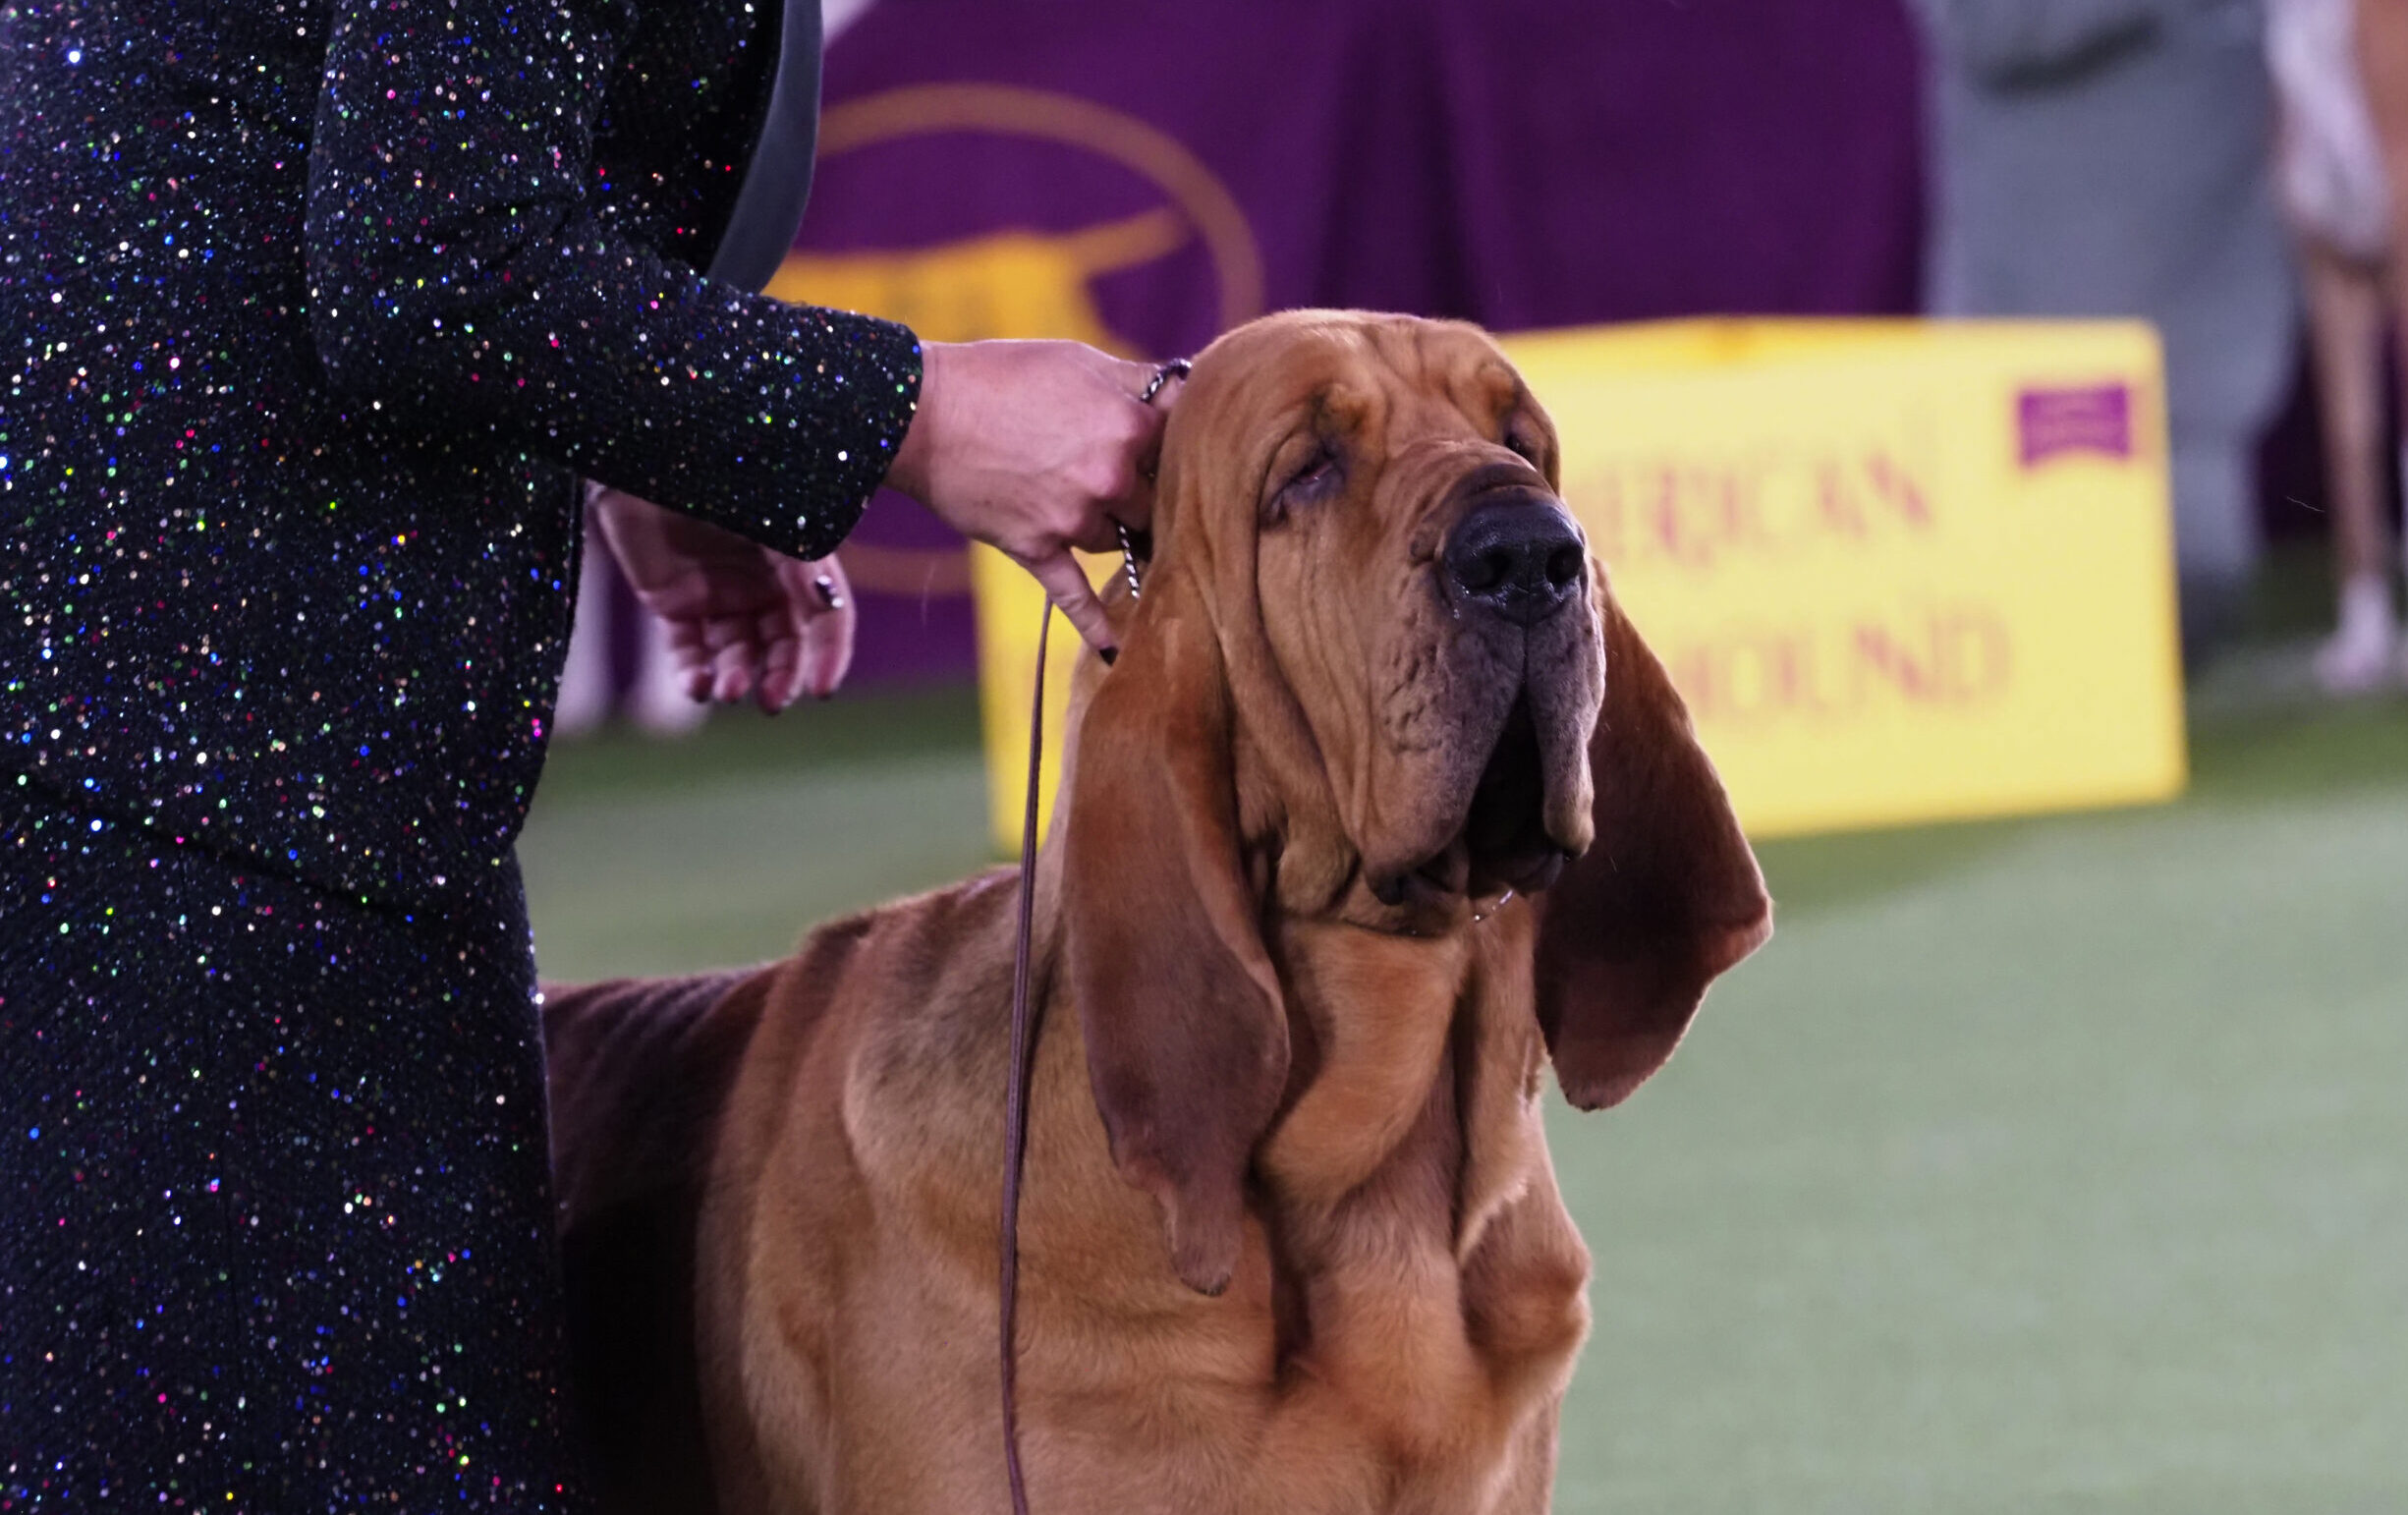 A Bloodhound from St. Joseph wins at the Westminster Kennel Club Dog Show -  Illinois Newsroom